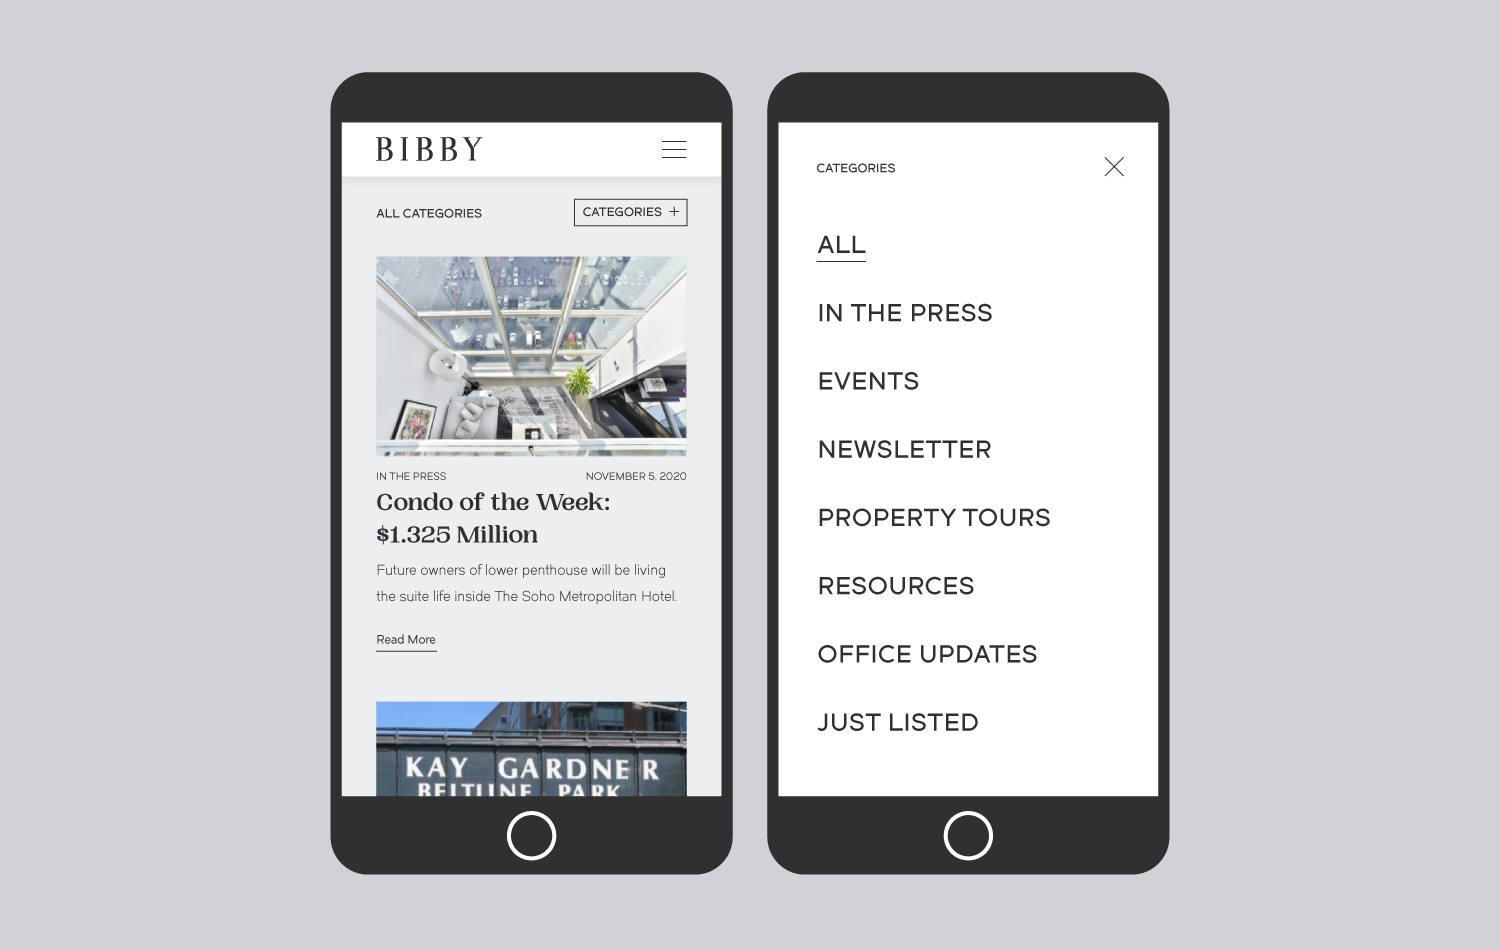 Bibby Mobile News Page and Filters